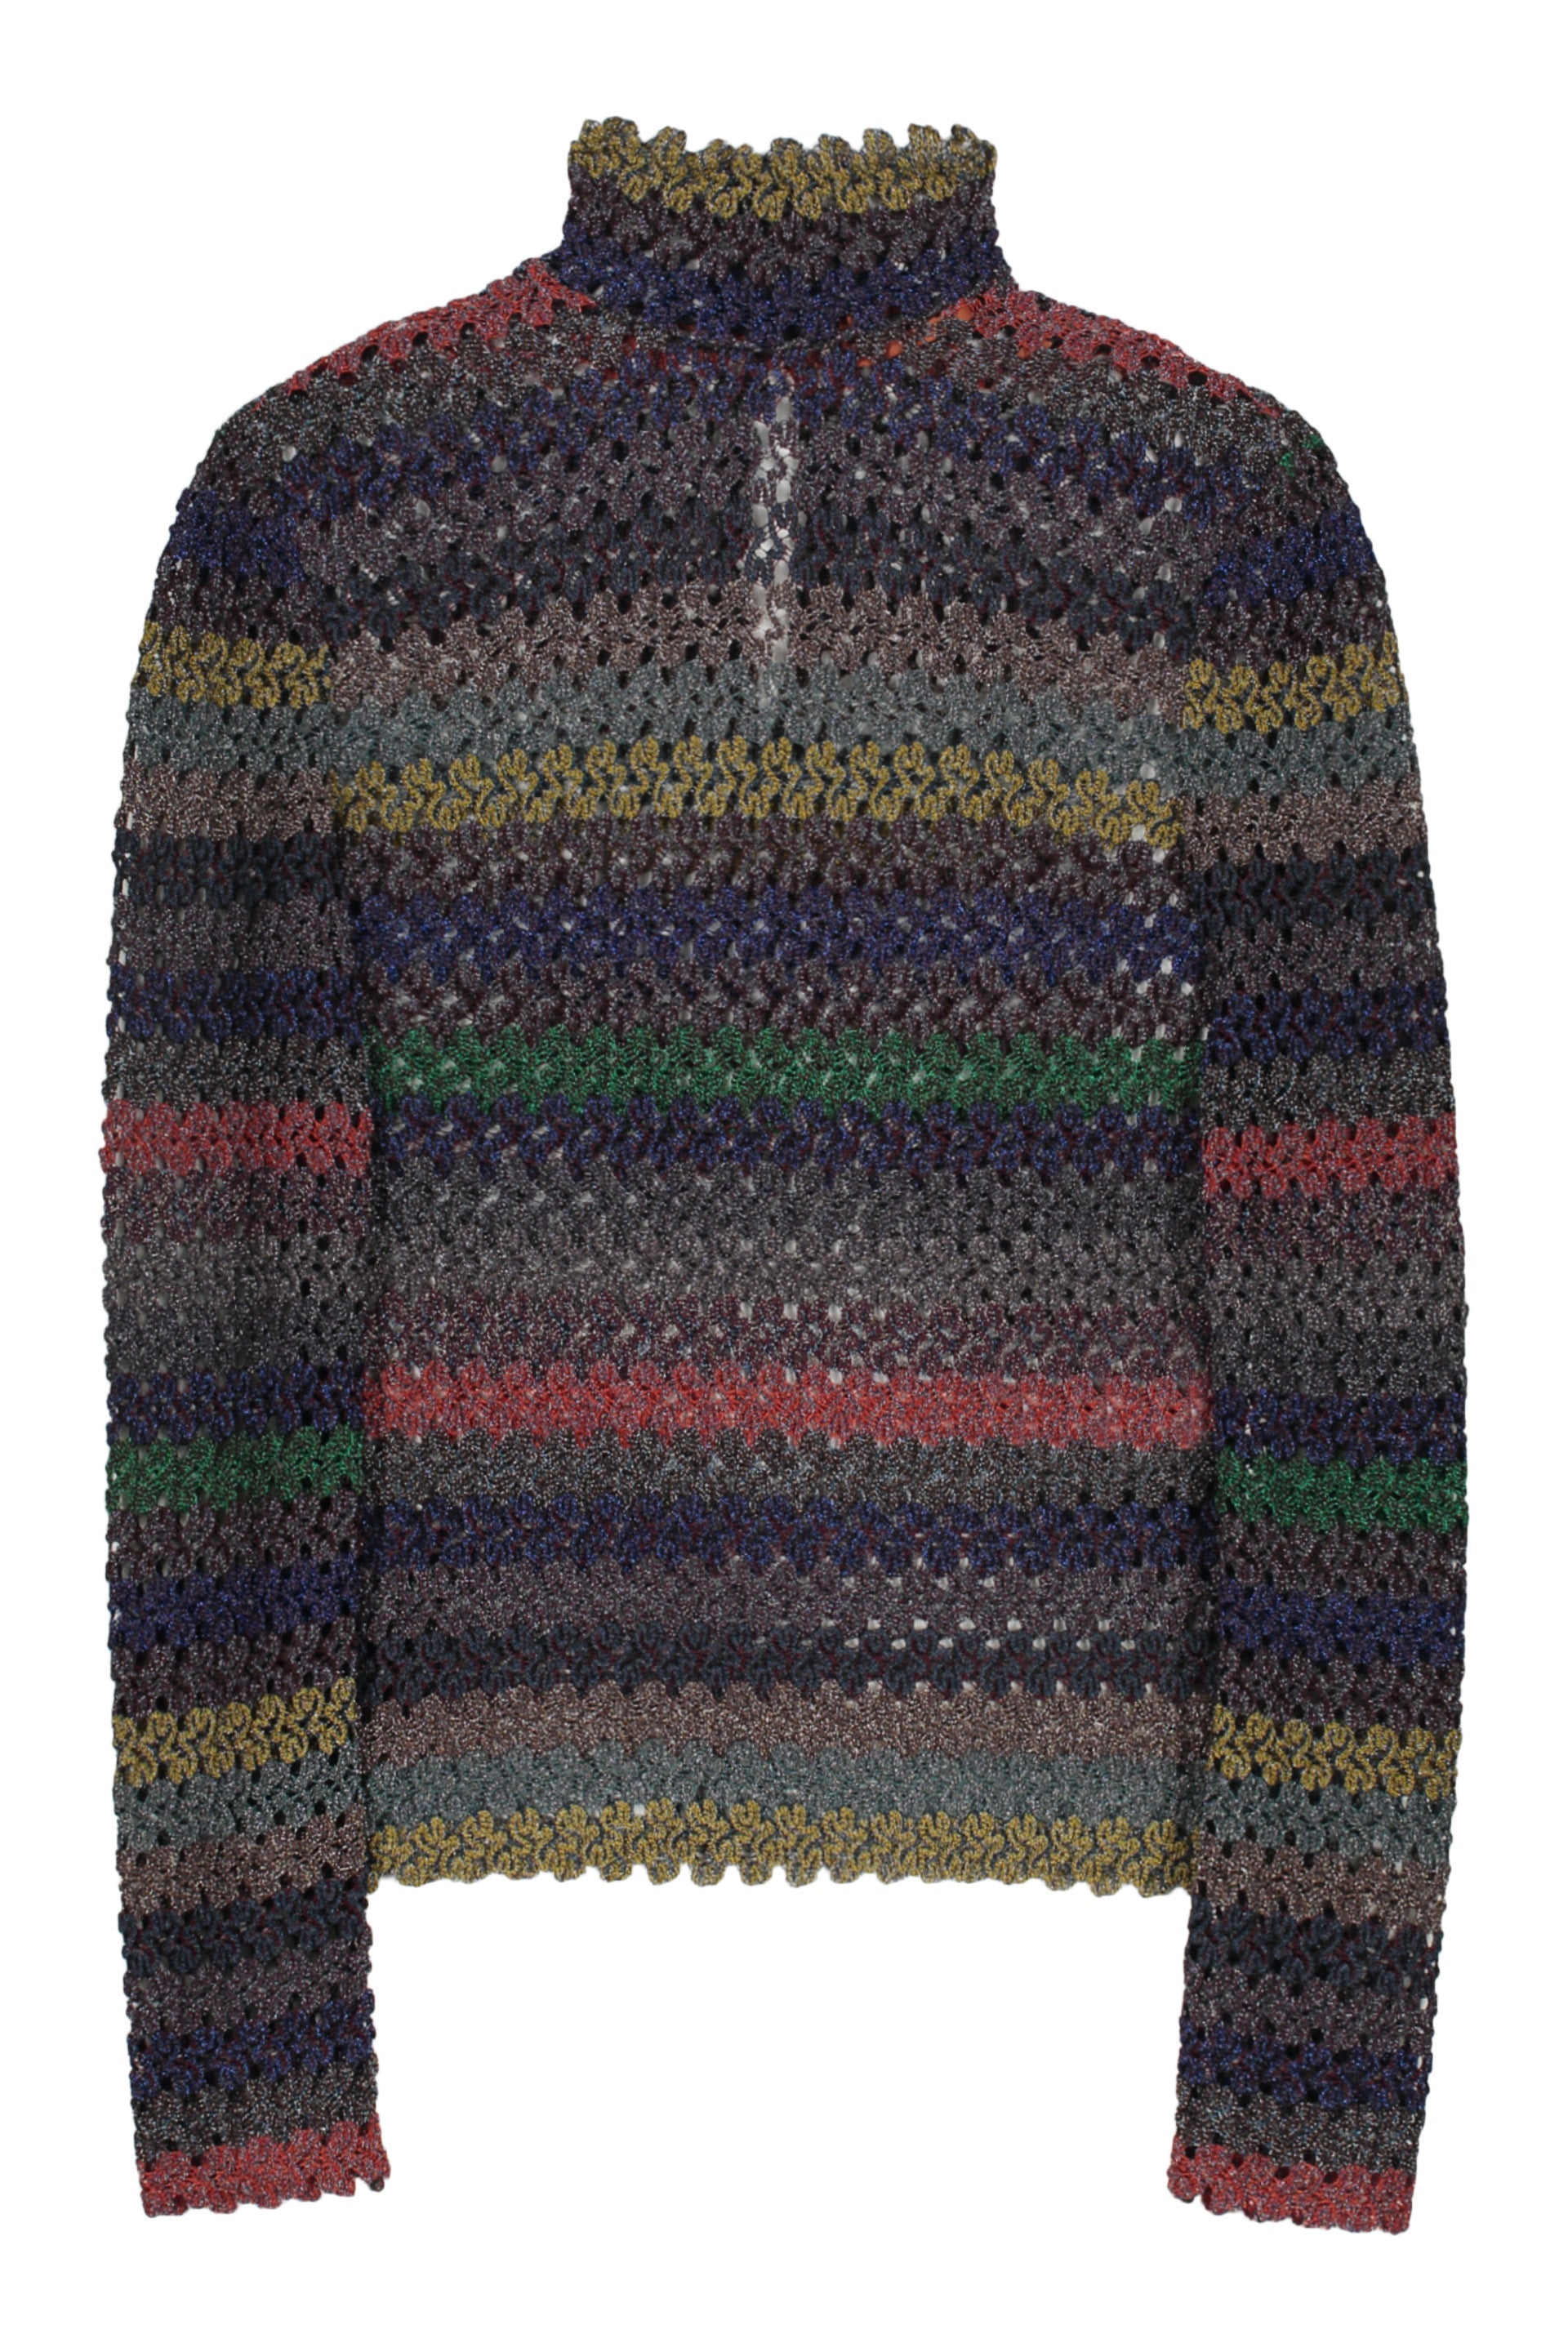 Missoni-OUTLET-SALE-Knitted-viscosa-blend-top-Shirts-40-ARCHIVE-COLLECTION_f6617e1e-dd3b-4c74-9856-3e7ee6c51da7.jpg